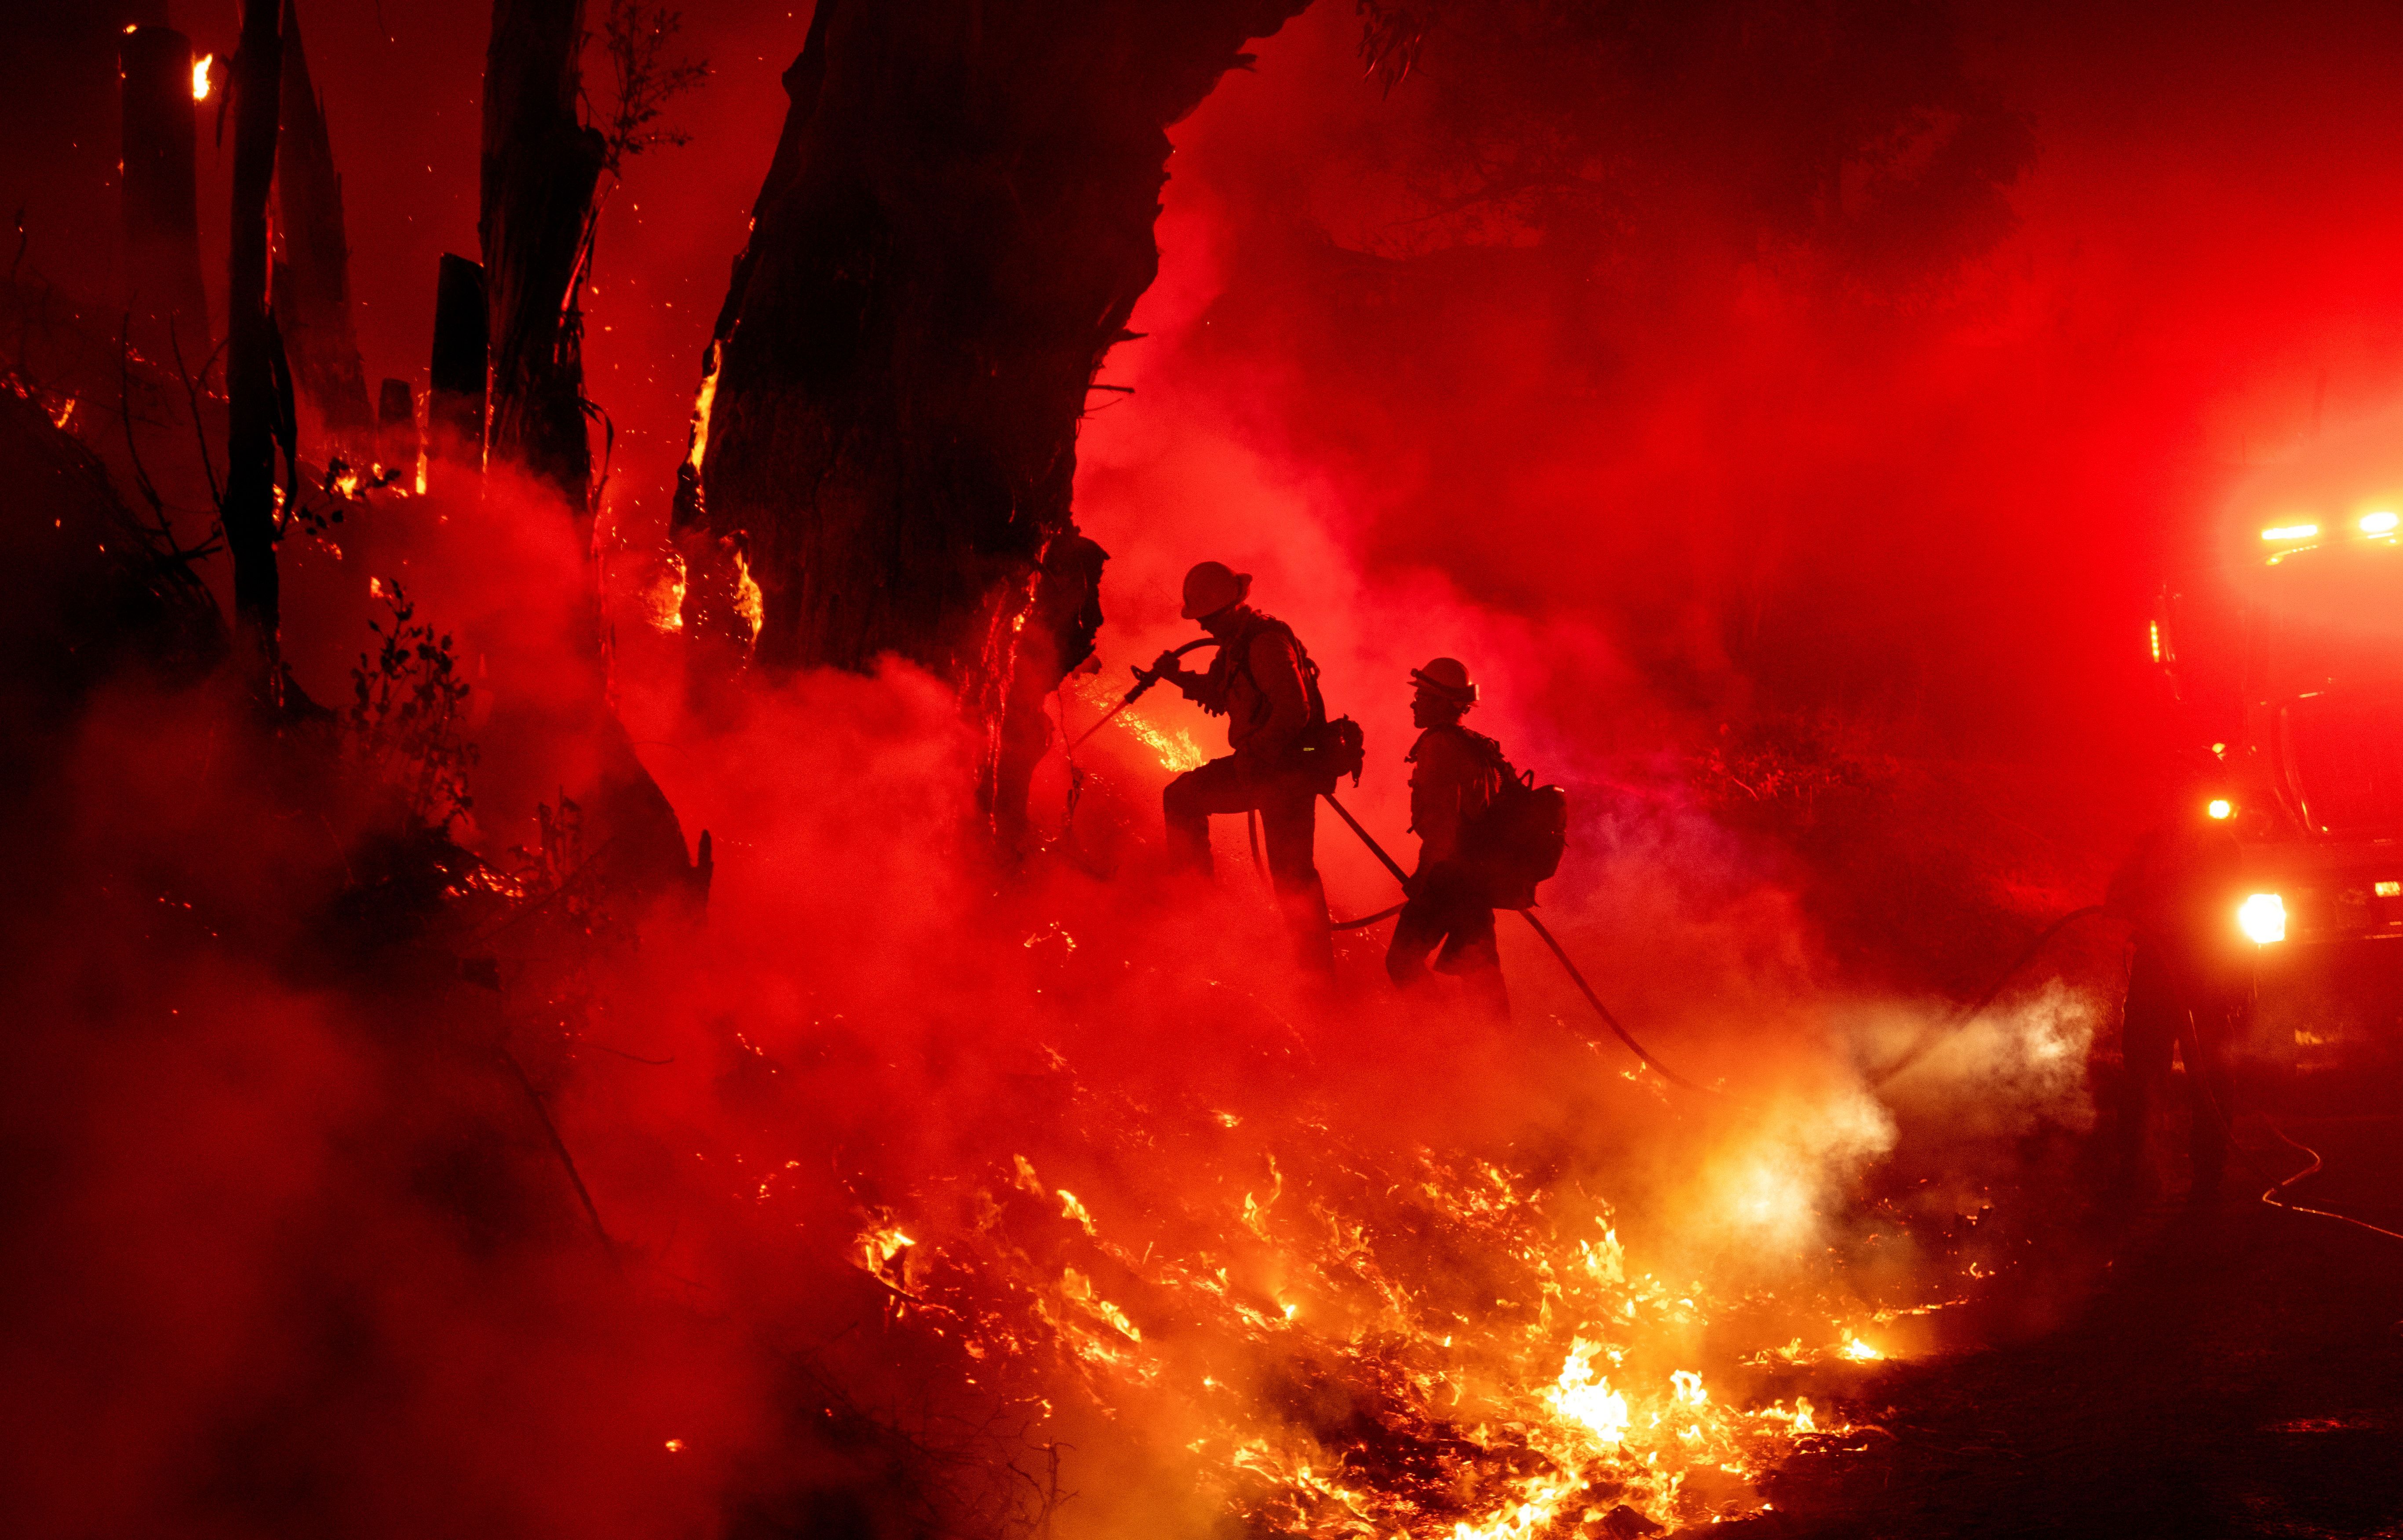 Firefighters work to control flames from a backfire during the Maria fire in Santa Paula, California 